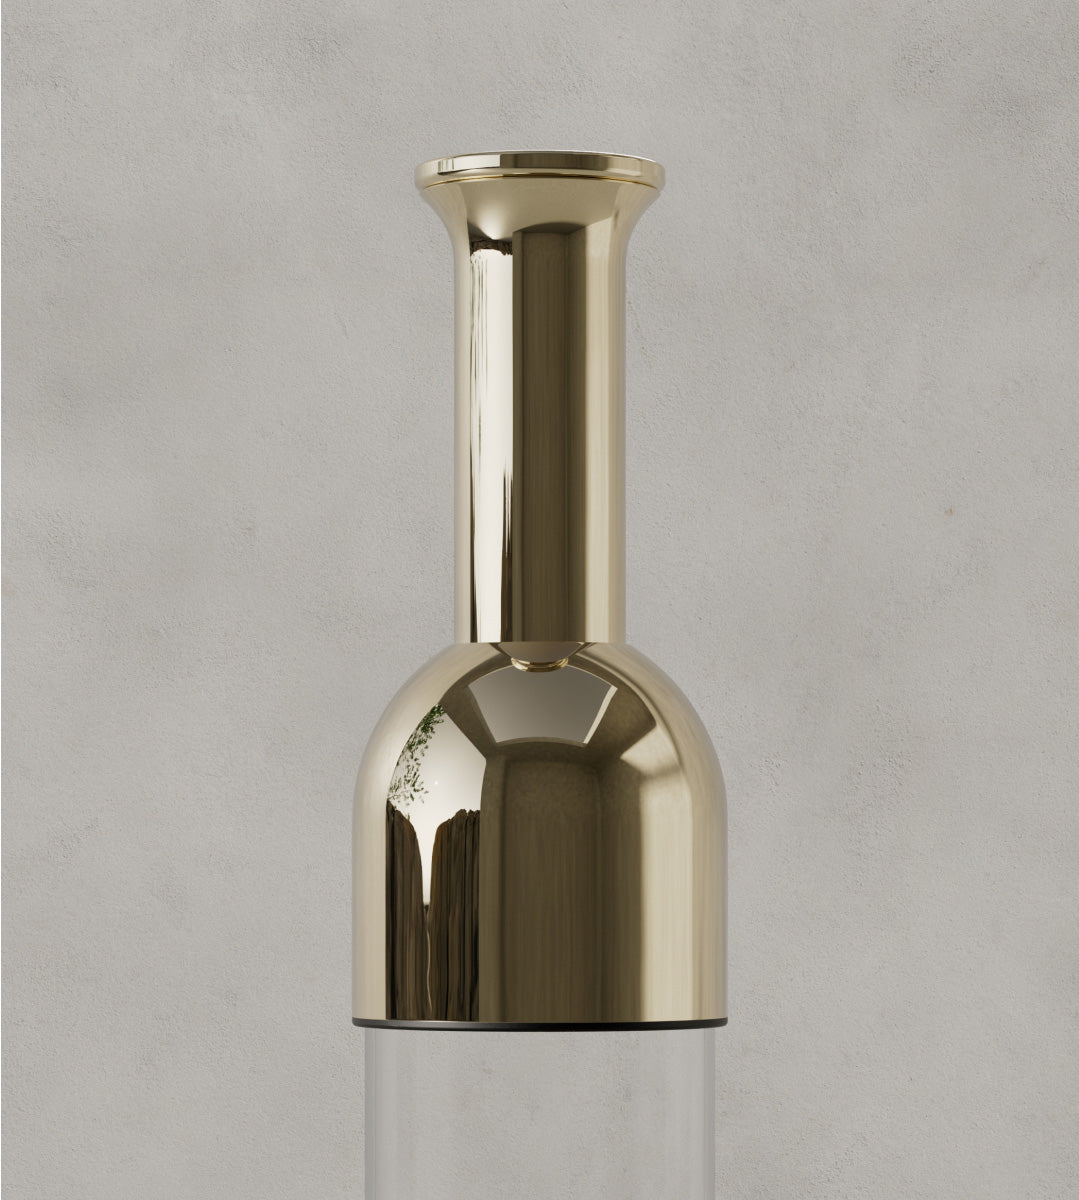 Details of the gold mirror eto wine decanter